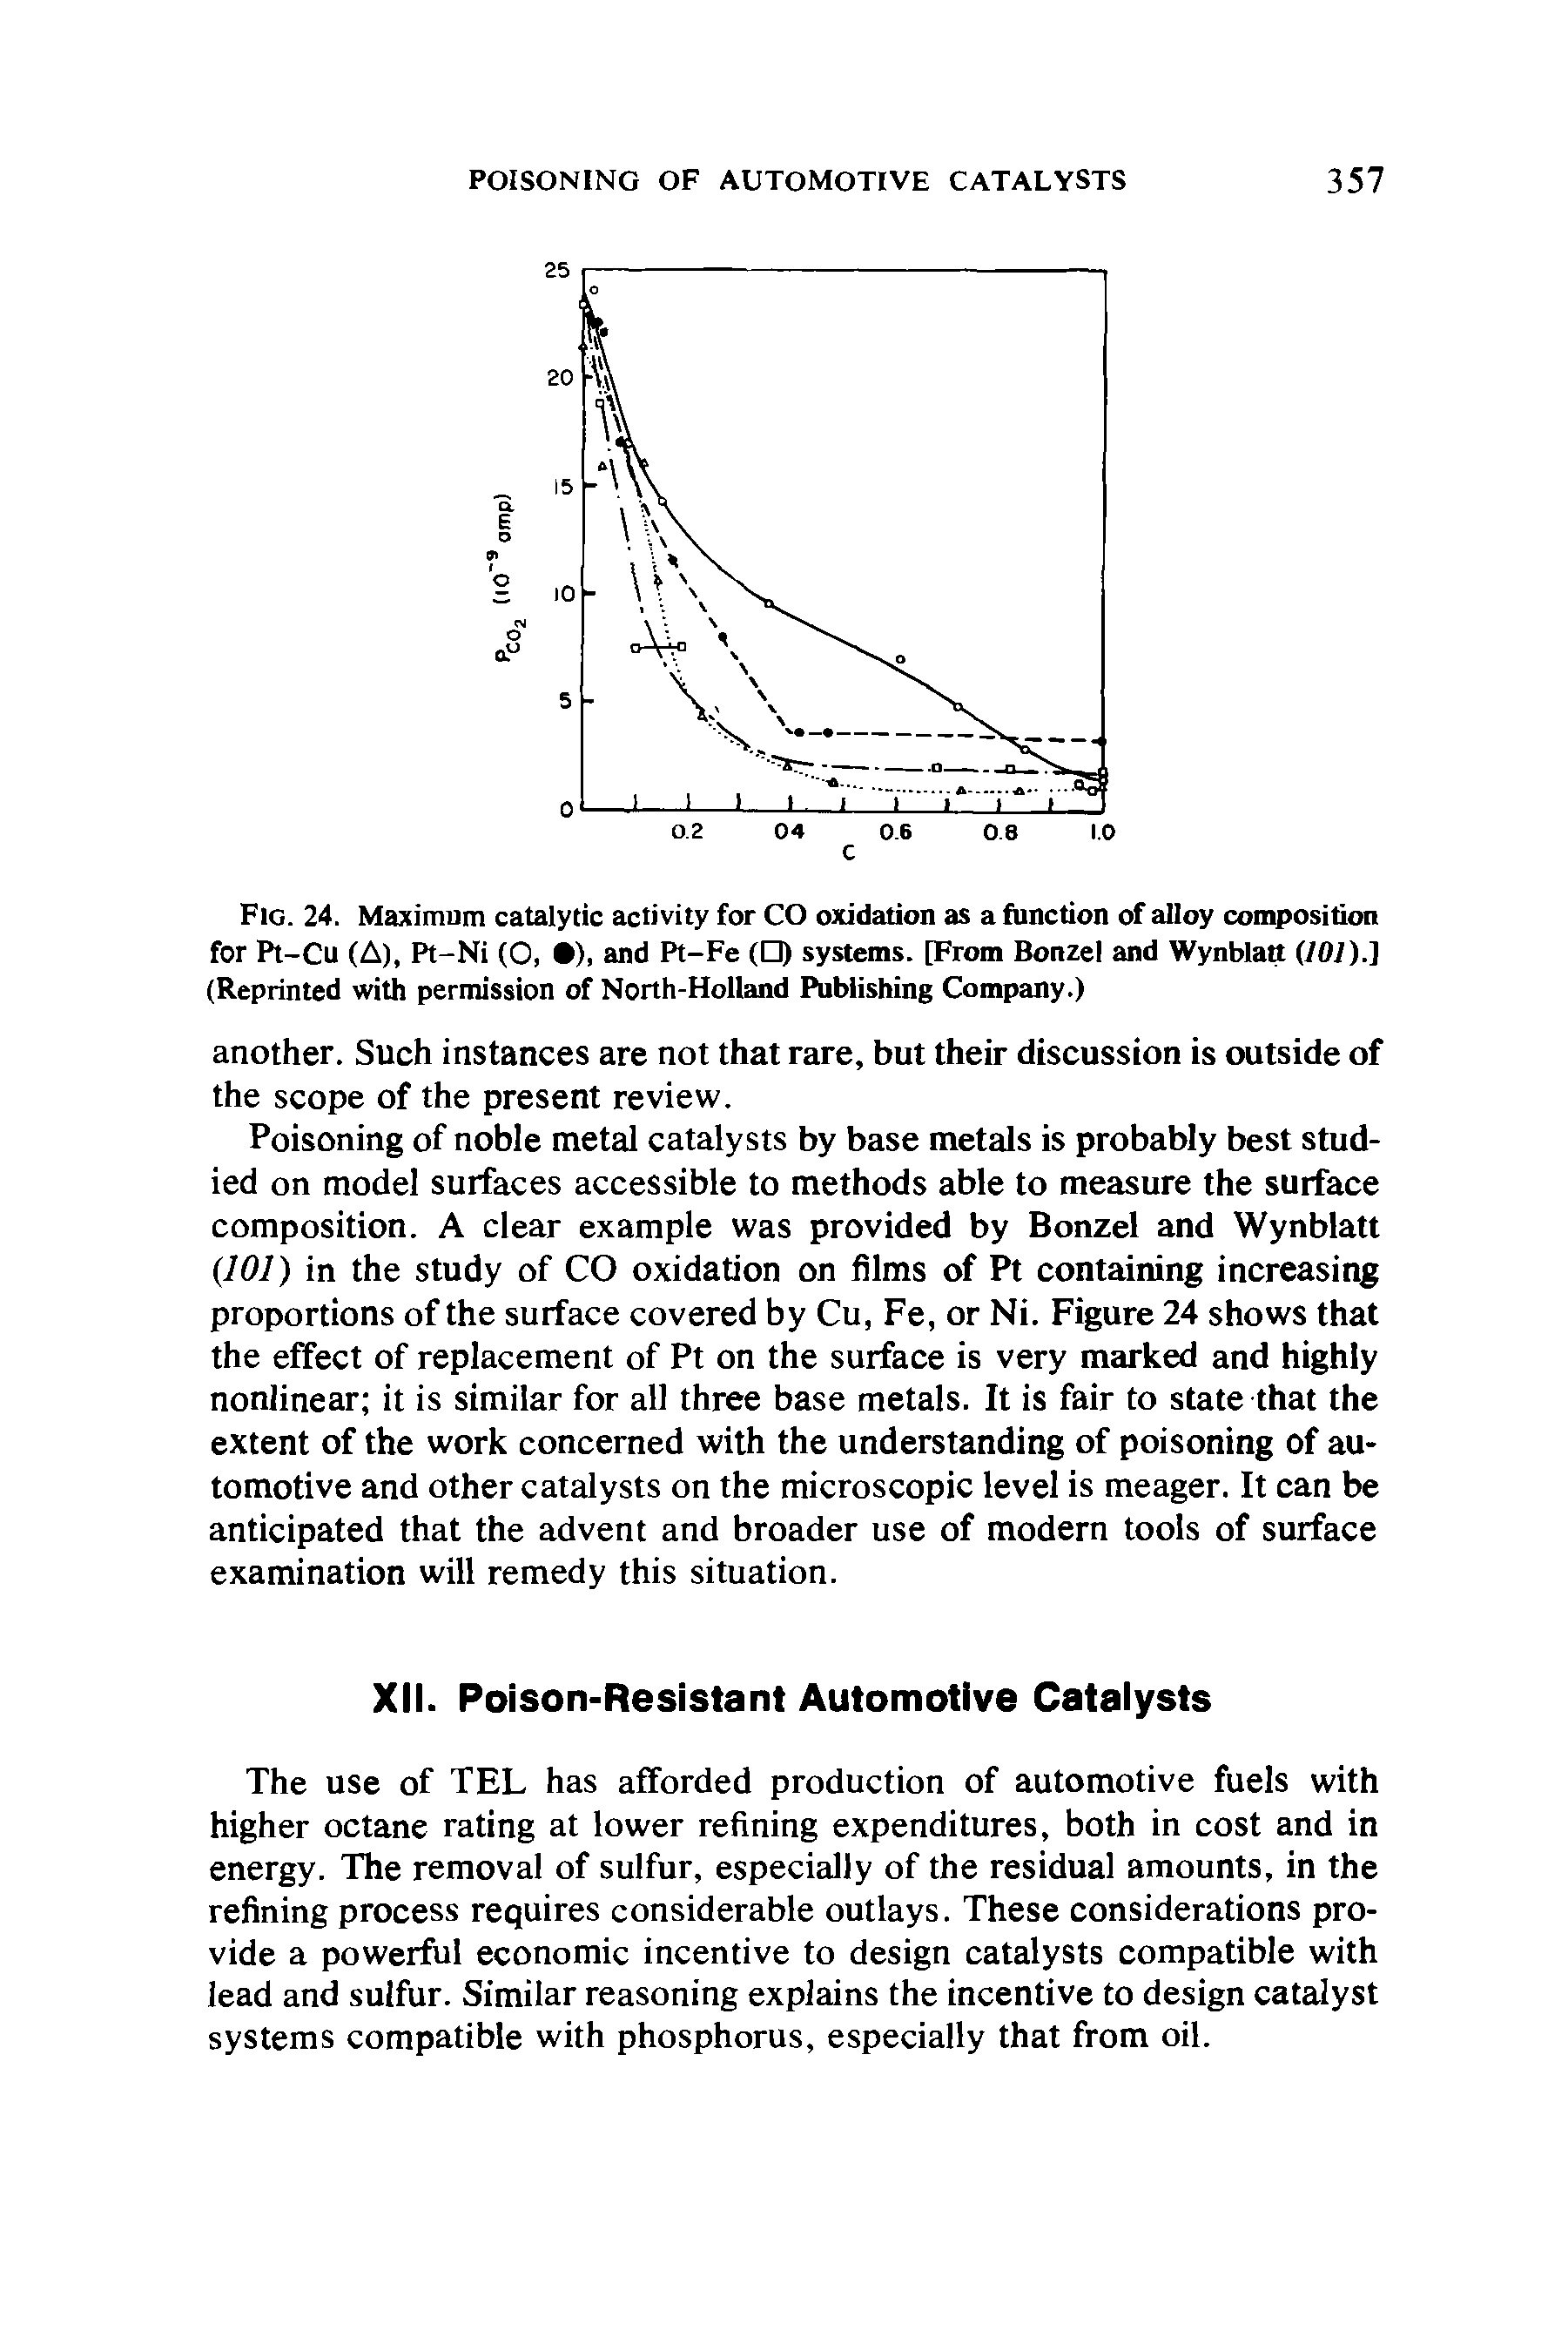 Fig. 24. Maximum catalytic activity for CO oxidation as a function of alloy composition for Pt-Cu (A), Pt-Ni (O, ), and Pt-Fe ( ) systems. [From Bonzel and Wynblatt (707).] (Reprinted with permission of North-Holland Publishing Company.)...